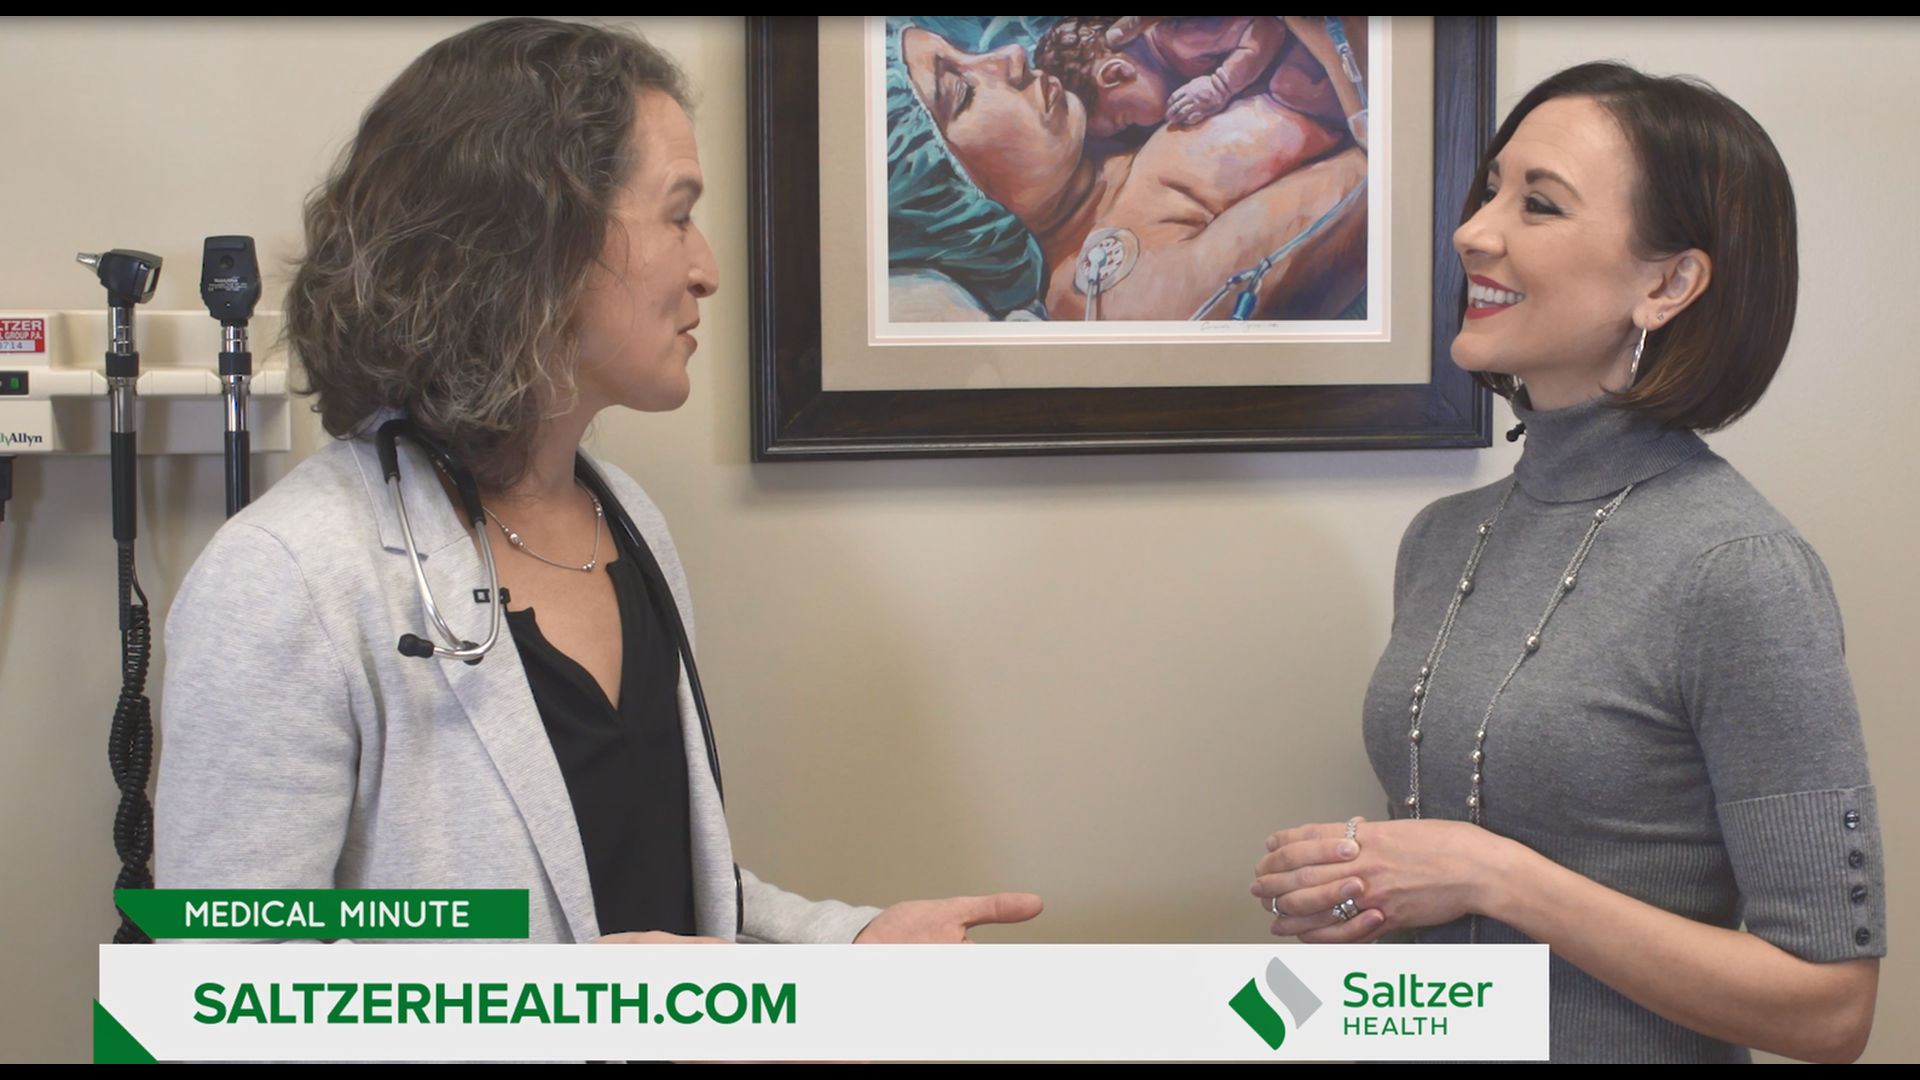 Collaborative care has expanded at Saltzer Health with the addition of a Certified Nurse Midwife, all while focusing on the individual needs of patients.